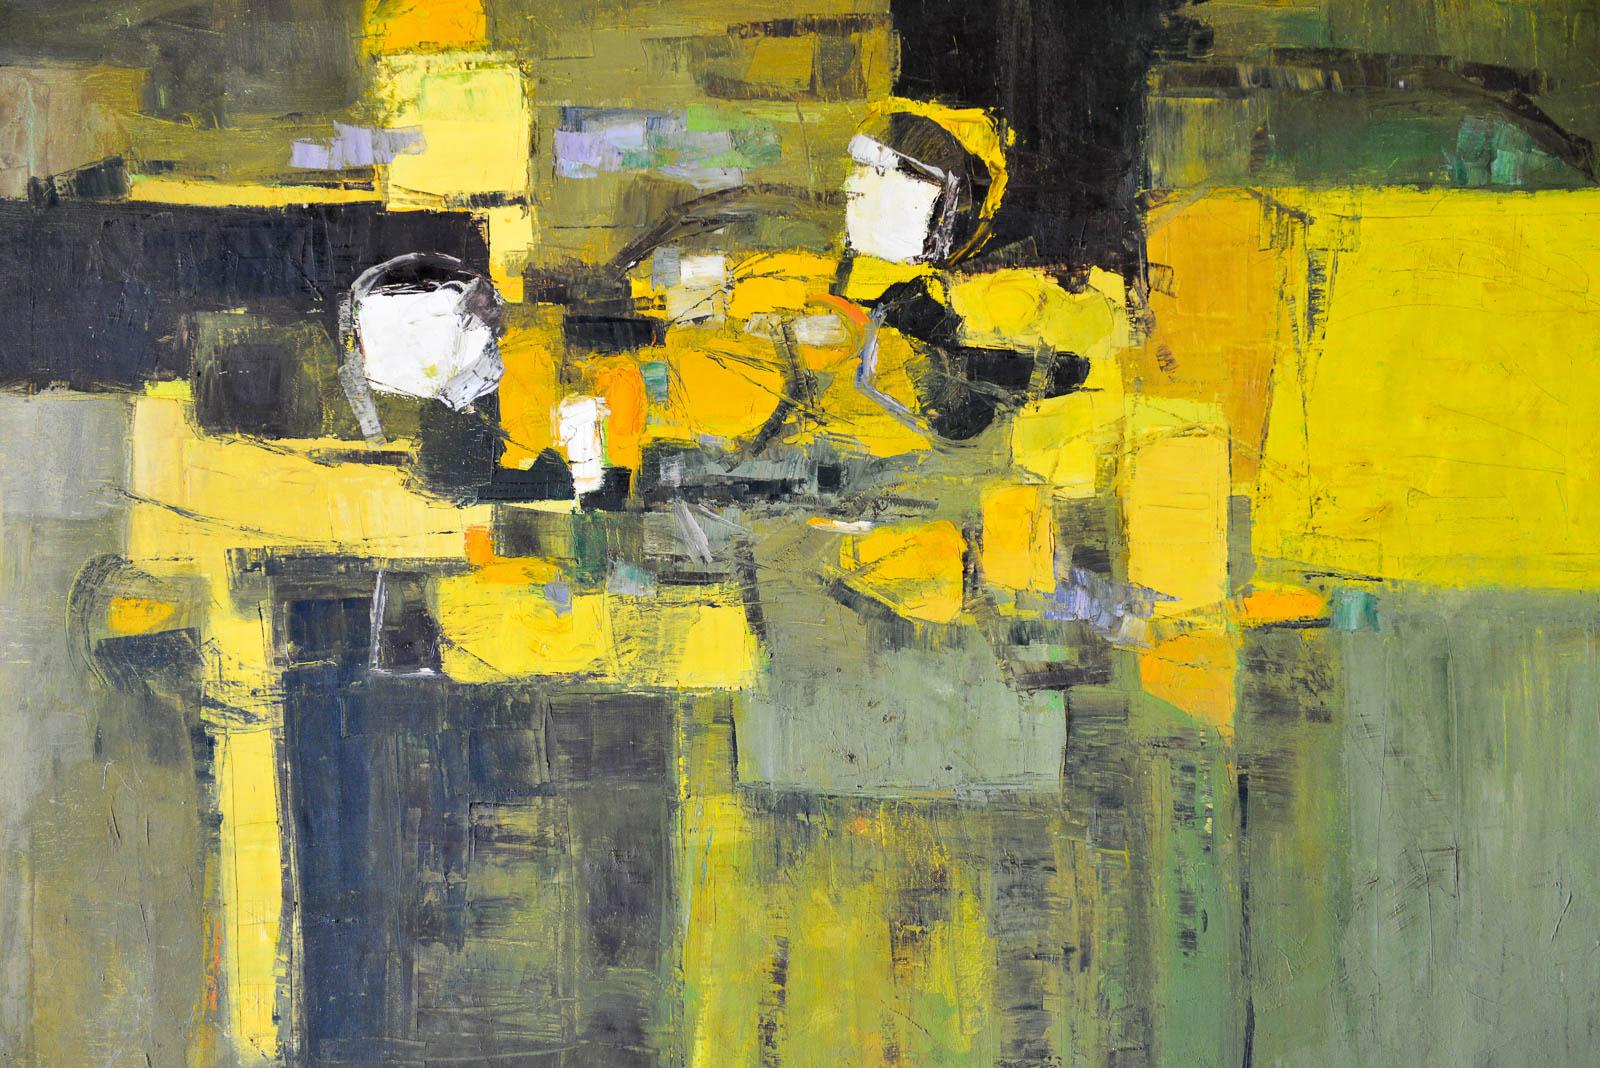 Abstract acrylic on canvas painting by California Artist Gail Wong, ca. 1970. Beautiful greens, yellows and tans featured in this large original oil titled 